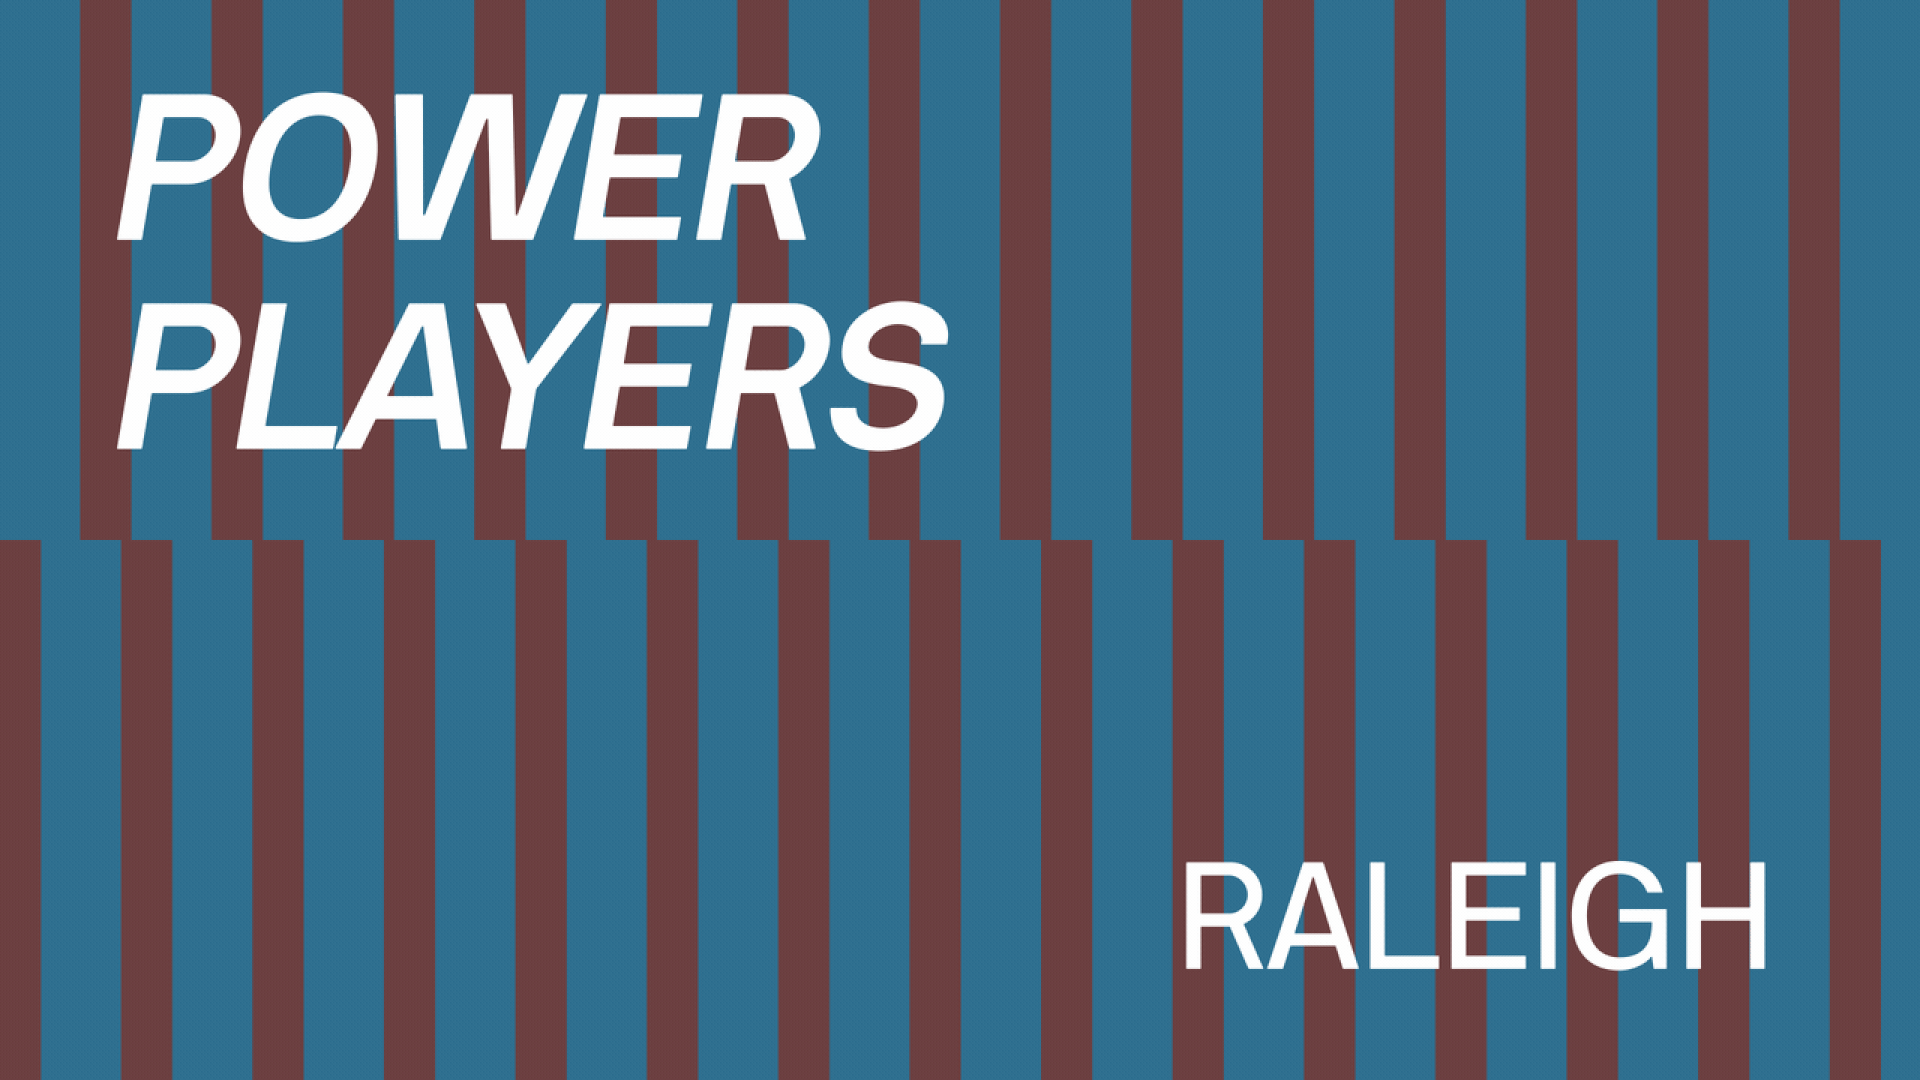 Illustration of two rows of dominos falling with text overlaid that reads Power Players Raleigh.